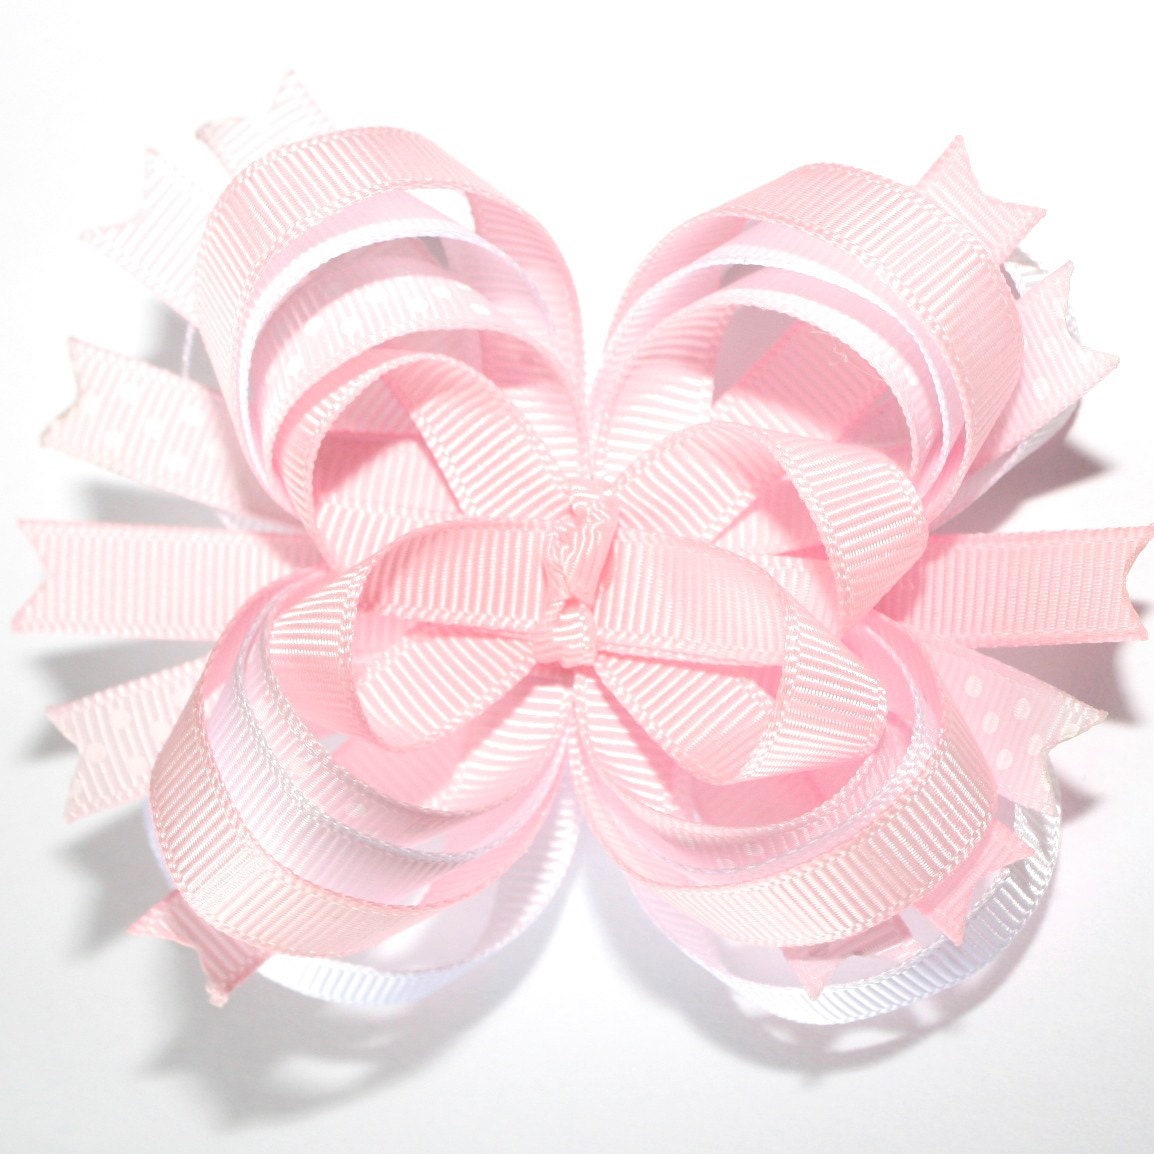 SALE...10% off by liking Lebelle Boutique on Facebook...Light Pink and White with Polka Dots Stacked Boutique Hair Bow